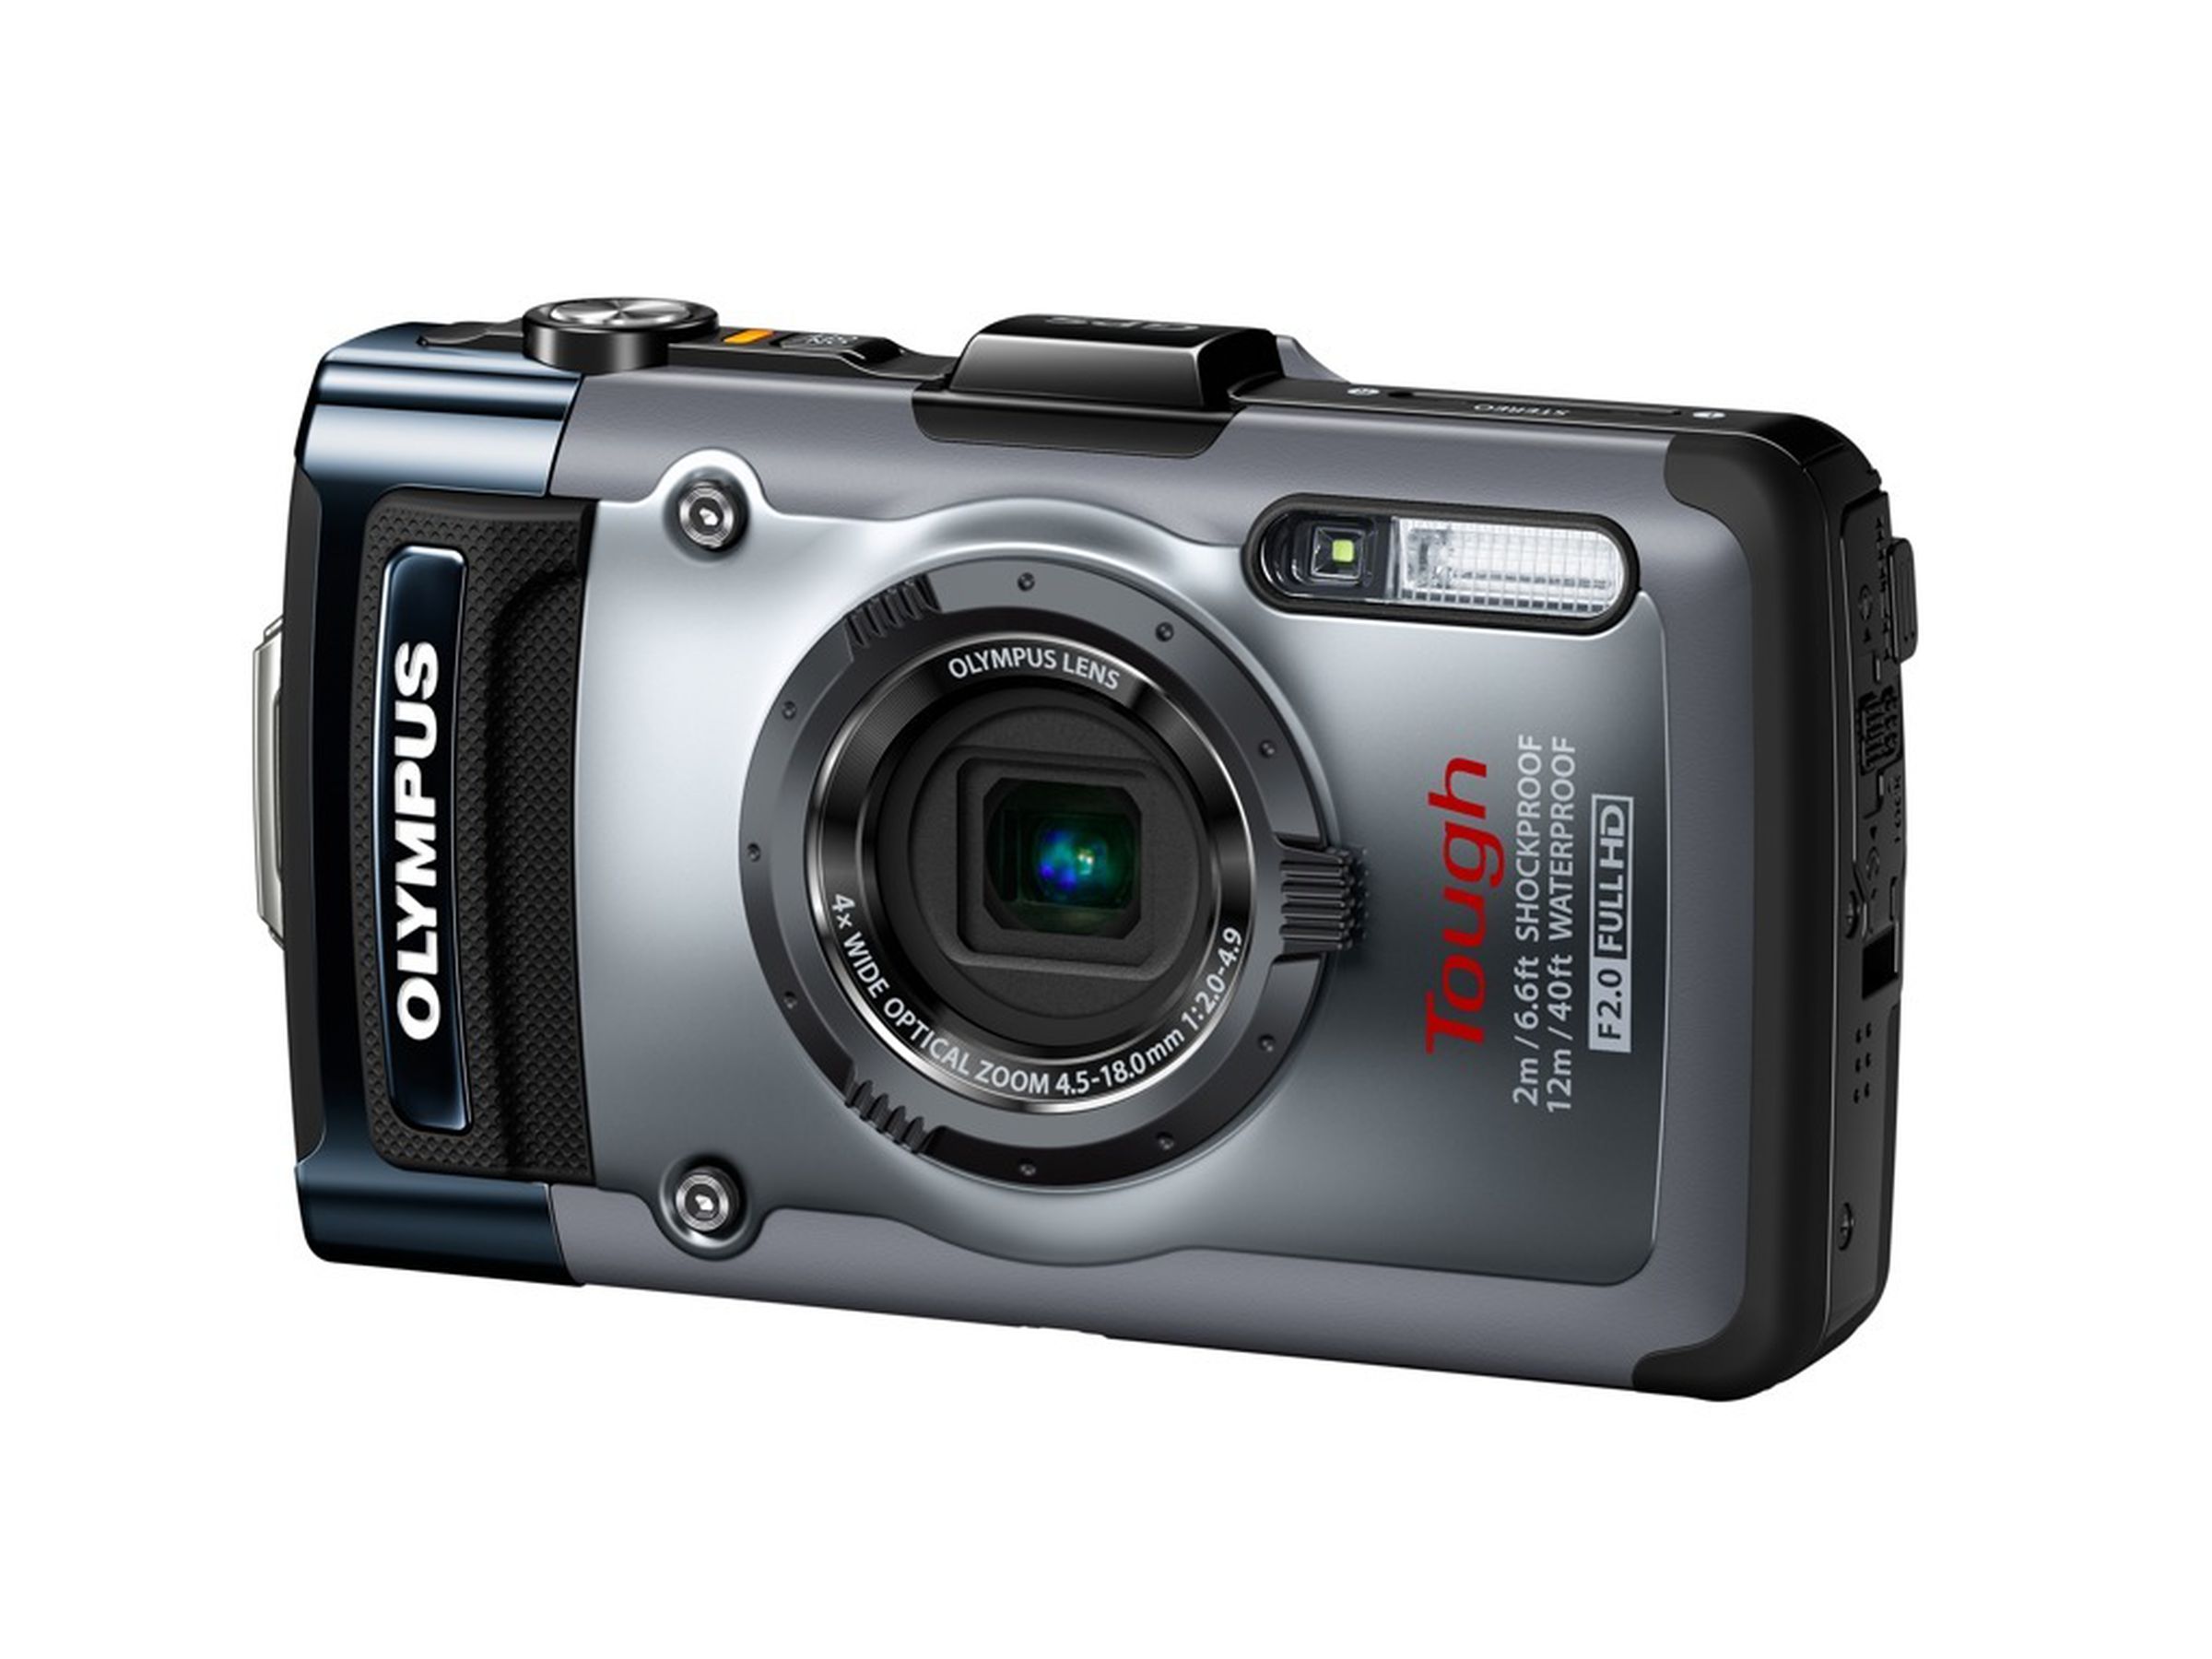 Olympus TG-1 press pictures